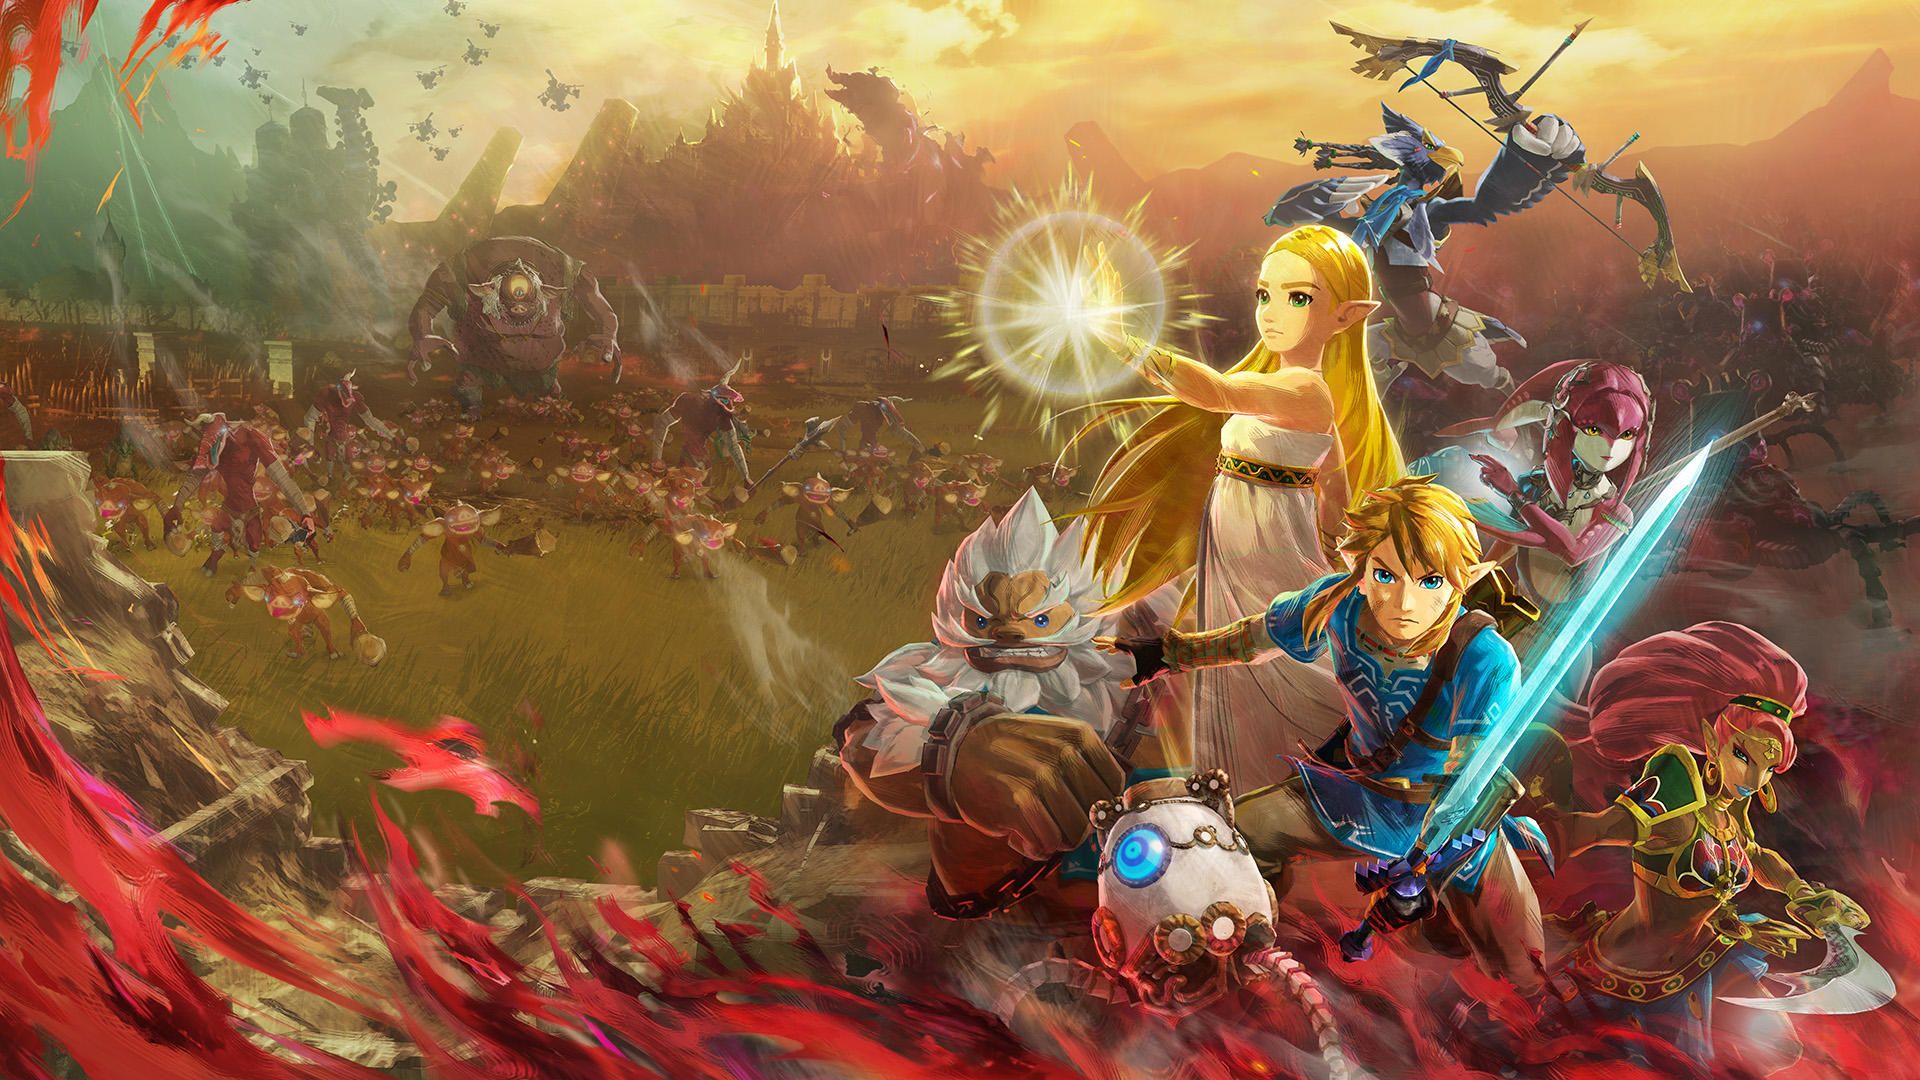 Hyrule warriors age of calamity hd wallpapers